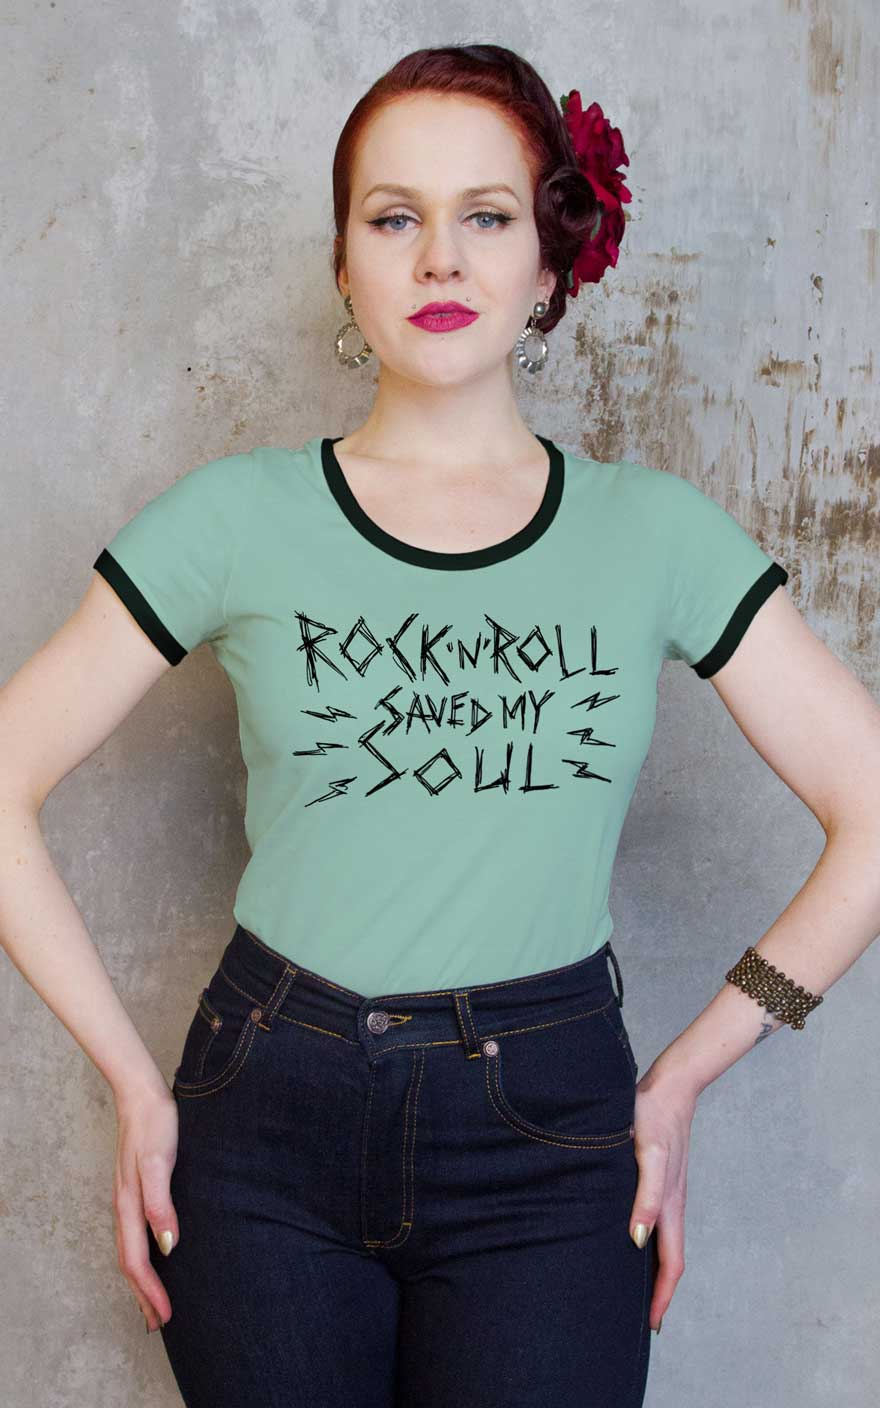 Rumble59 - Ringer Shirt - Rock'n'Roll saved my soul #S von Rumble59